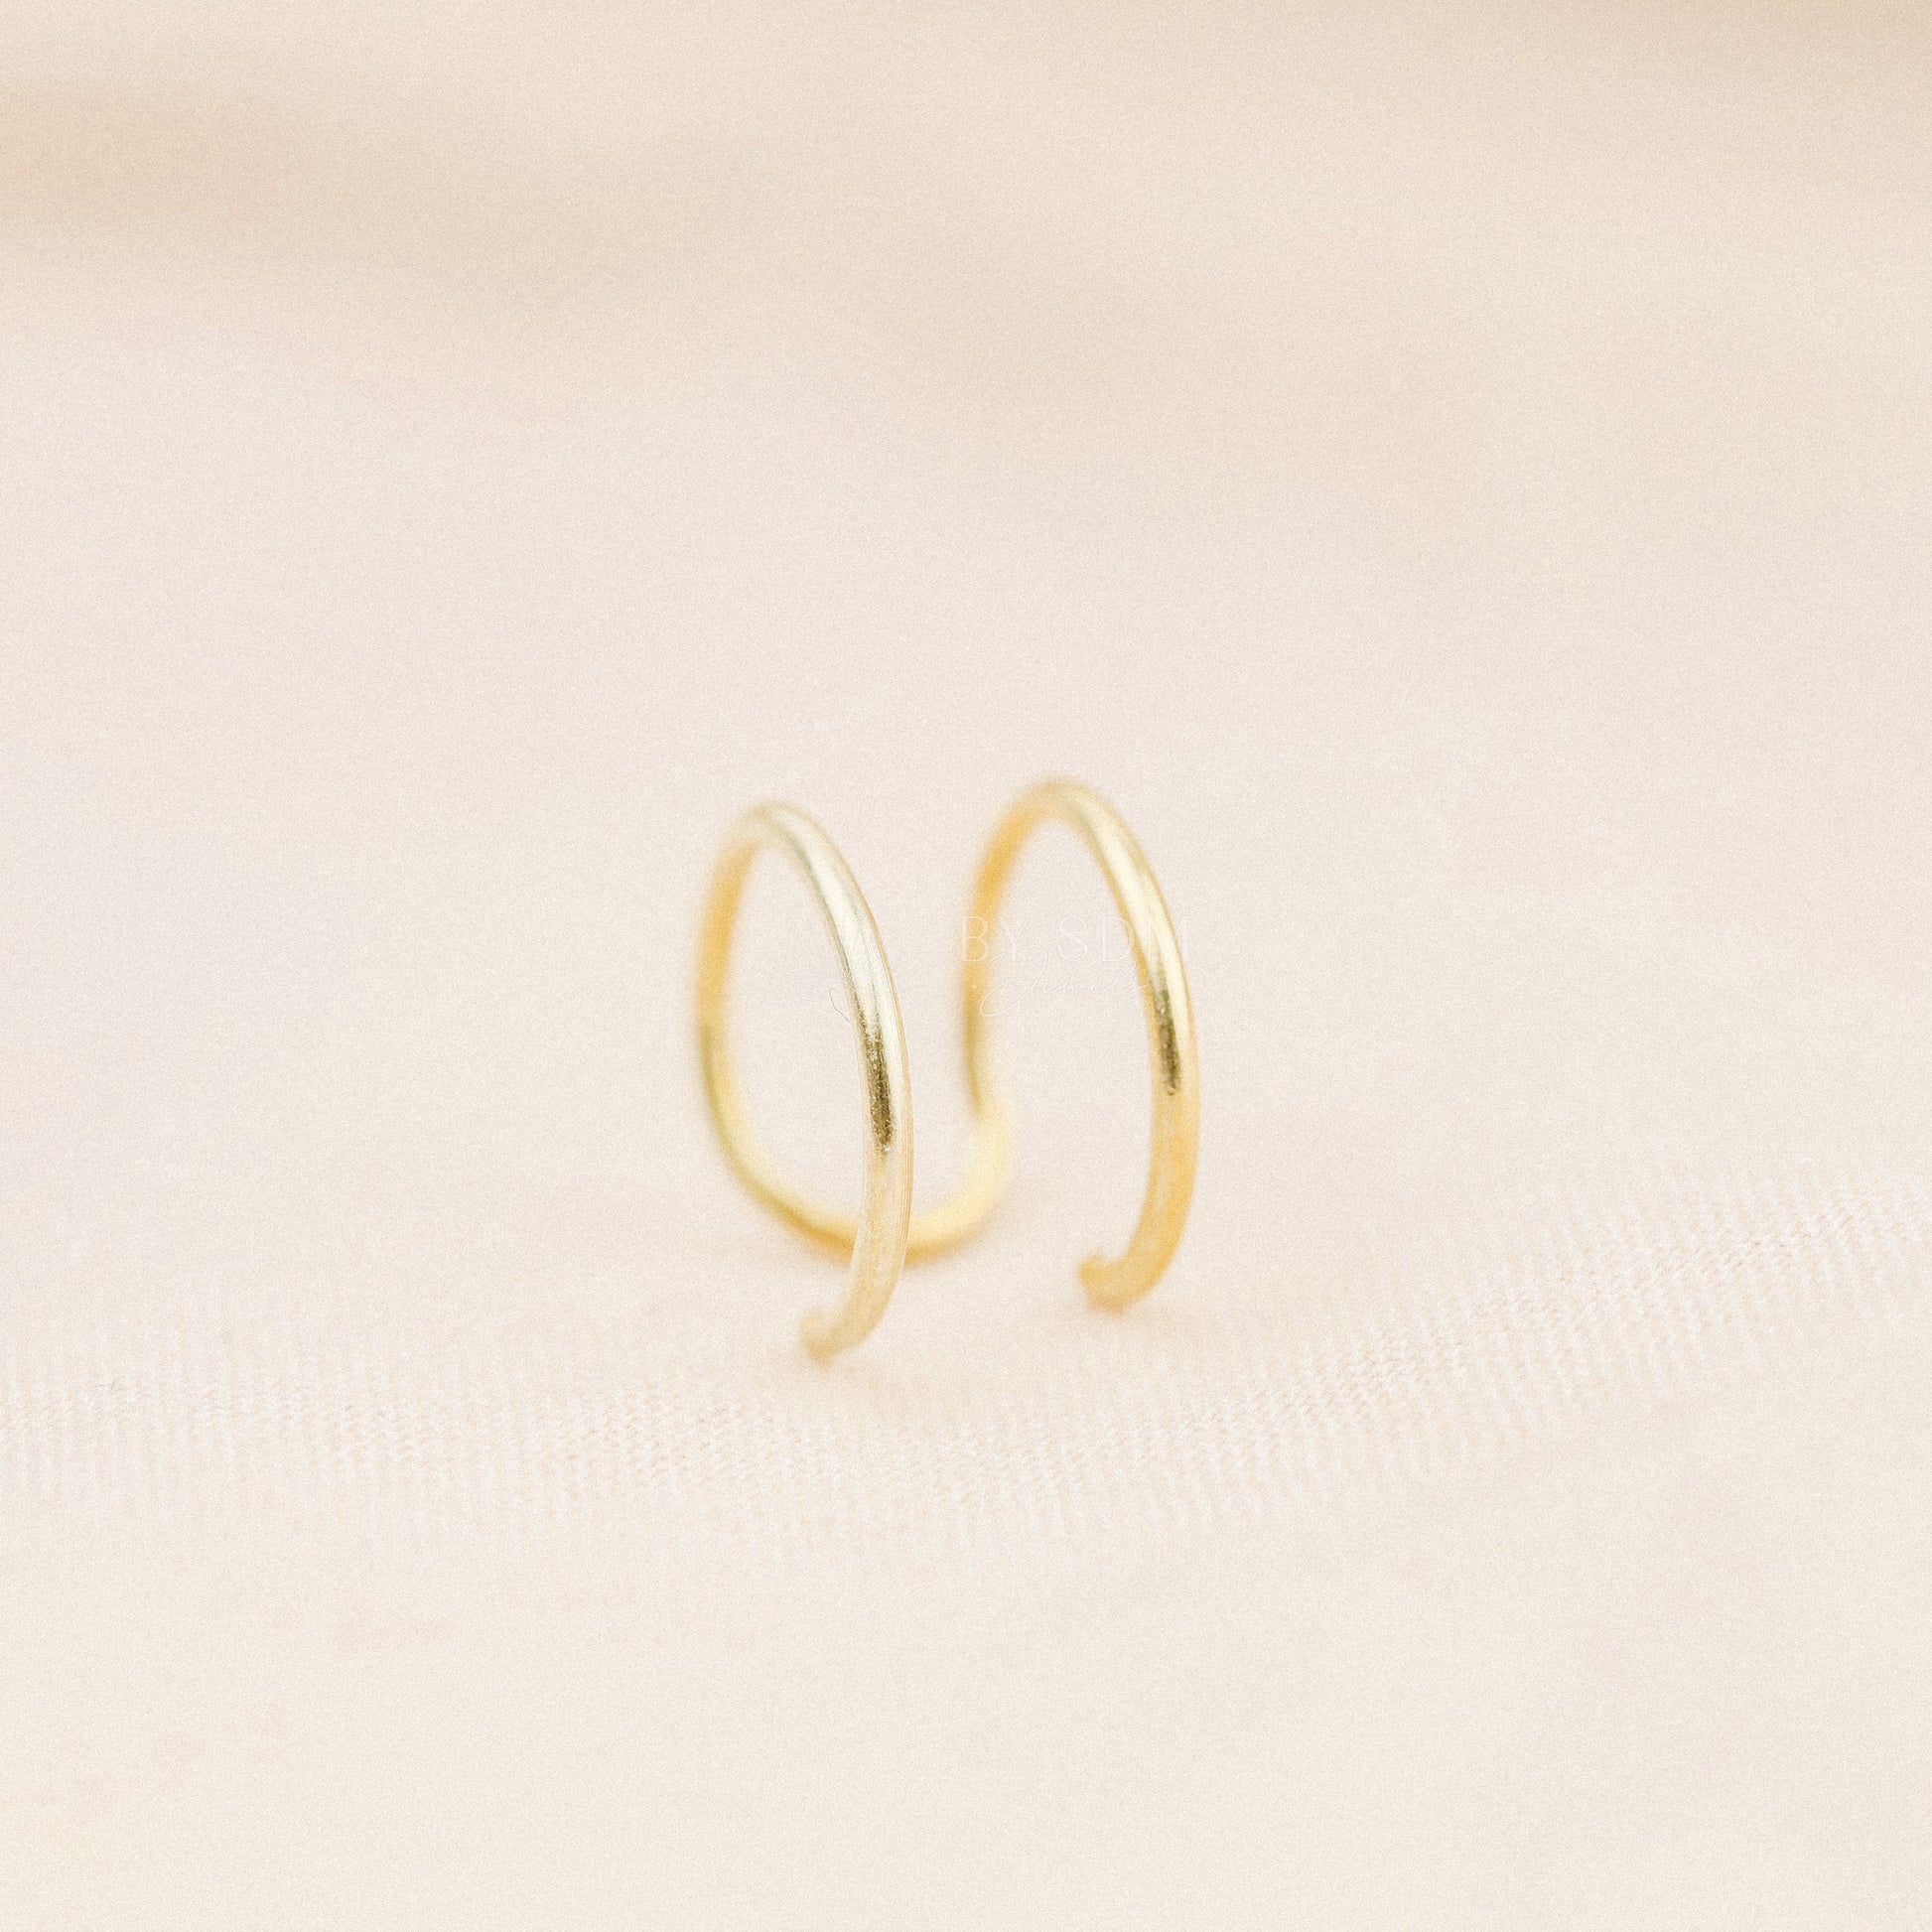 Double Wire Ear Cuff • Dainty Jewelry • Sterling Silver or Gold Filled • Modern • Minimal • Gifts for Her • Cartilage Earring • BYSDMJEWELS